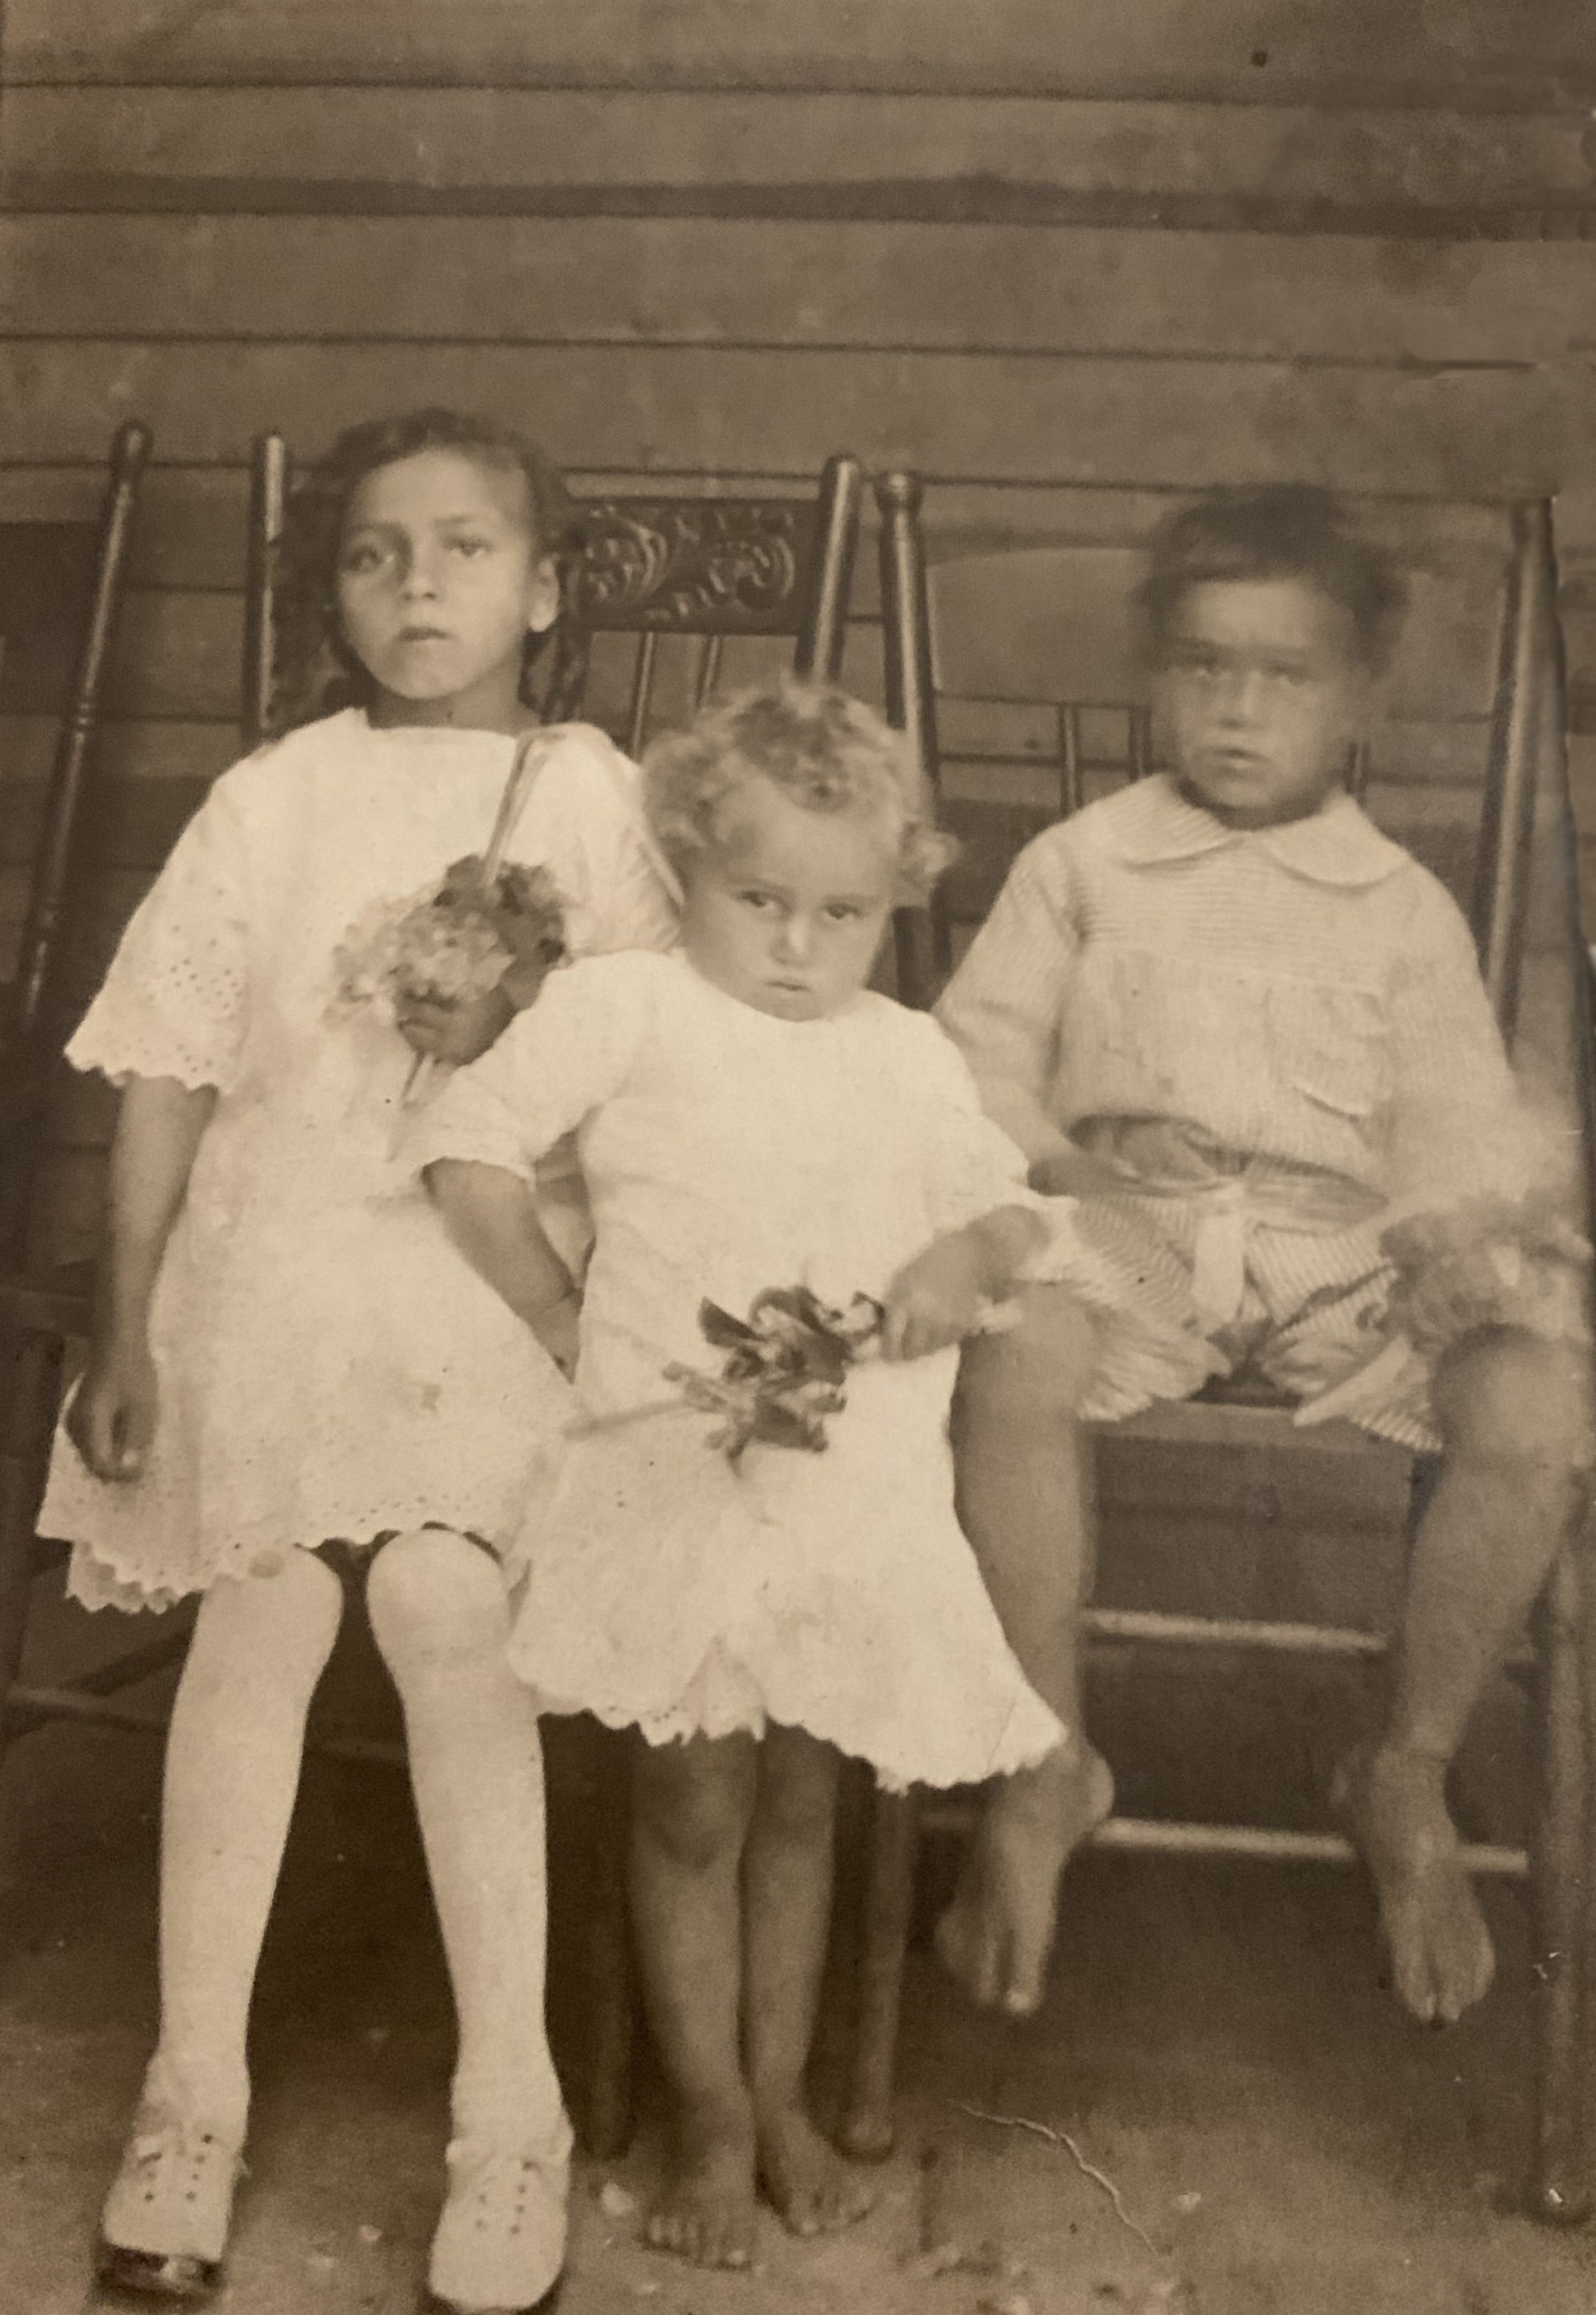 11.Confirmed by Lenore O. l-r: Olivia Johnson Murray, Adelaide Johnson Odom and Welch Johnson. Thank you !